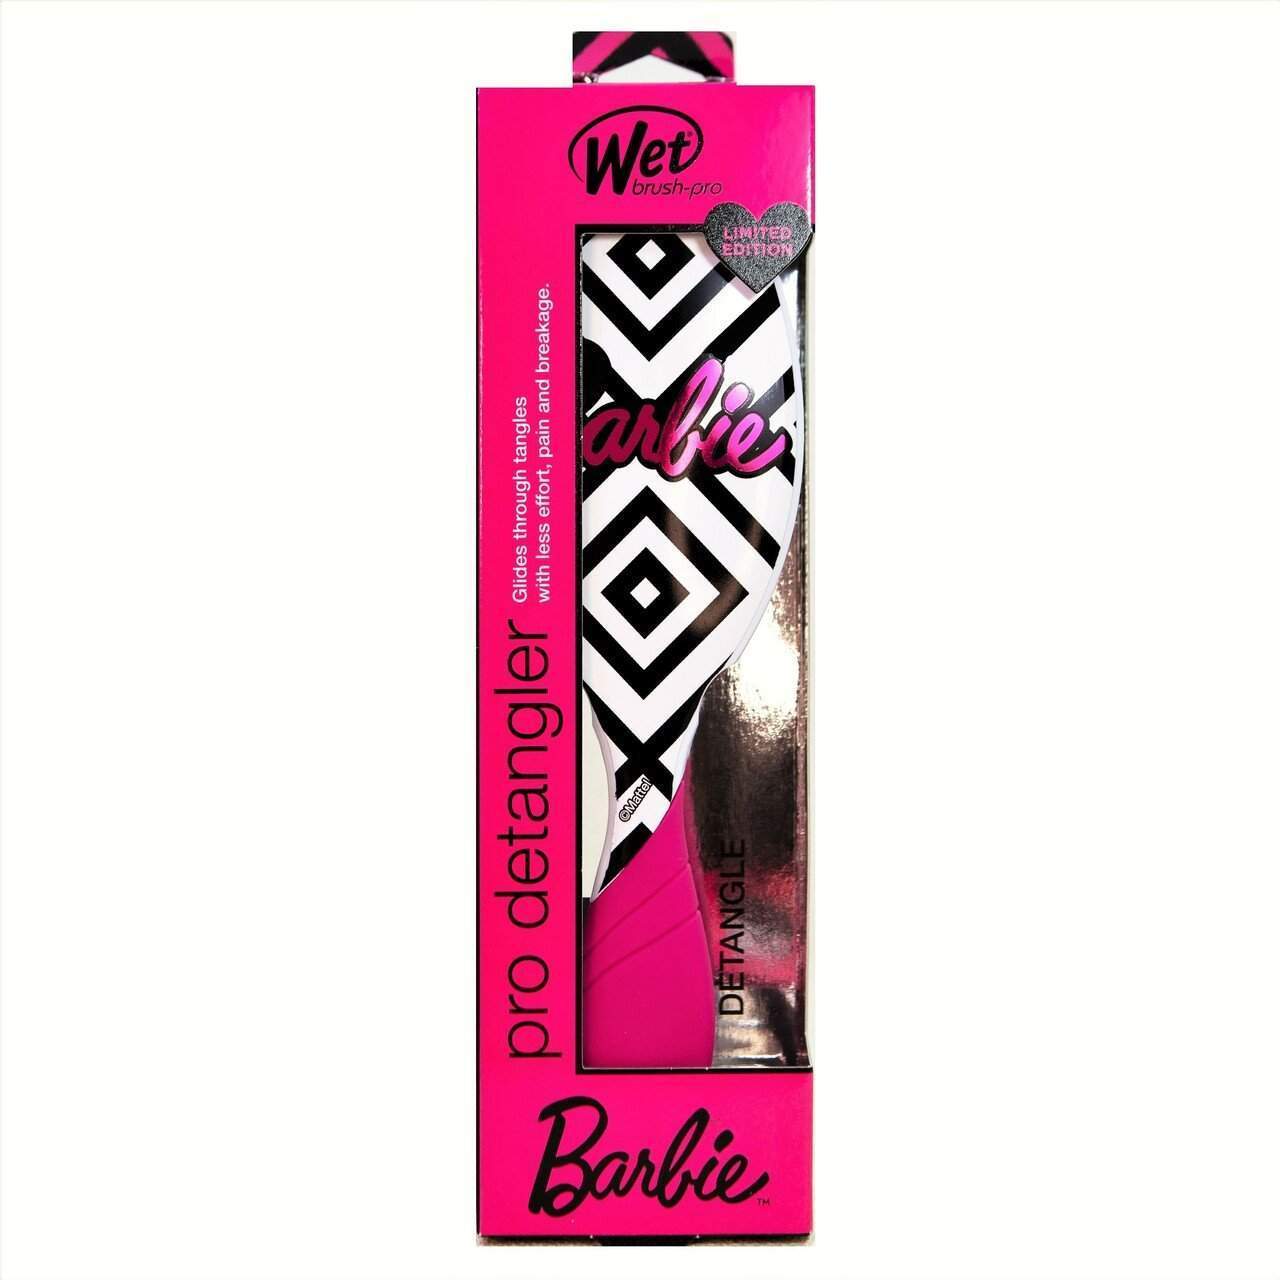 Wet Brush Pro Detangler Brush Barbie-Wet Brush-Brand_Wet Brush,Collection_Hair,Collection_Tools and Brushes,FABS_Friday2022,Featured_Products,Tool_Brushes,Tool_Detangling Brush,Tool_Hair Tools,Tool_Kids Brushes,WET_Barbie Detanglers,WET_Kid's Brushes and Products,WET_Pro Detanglers